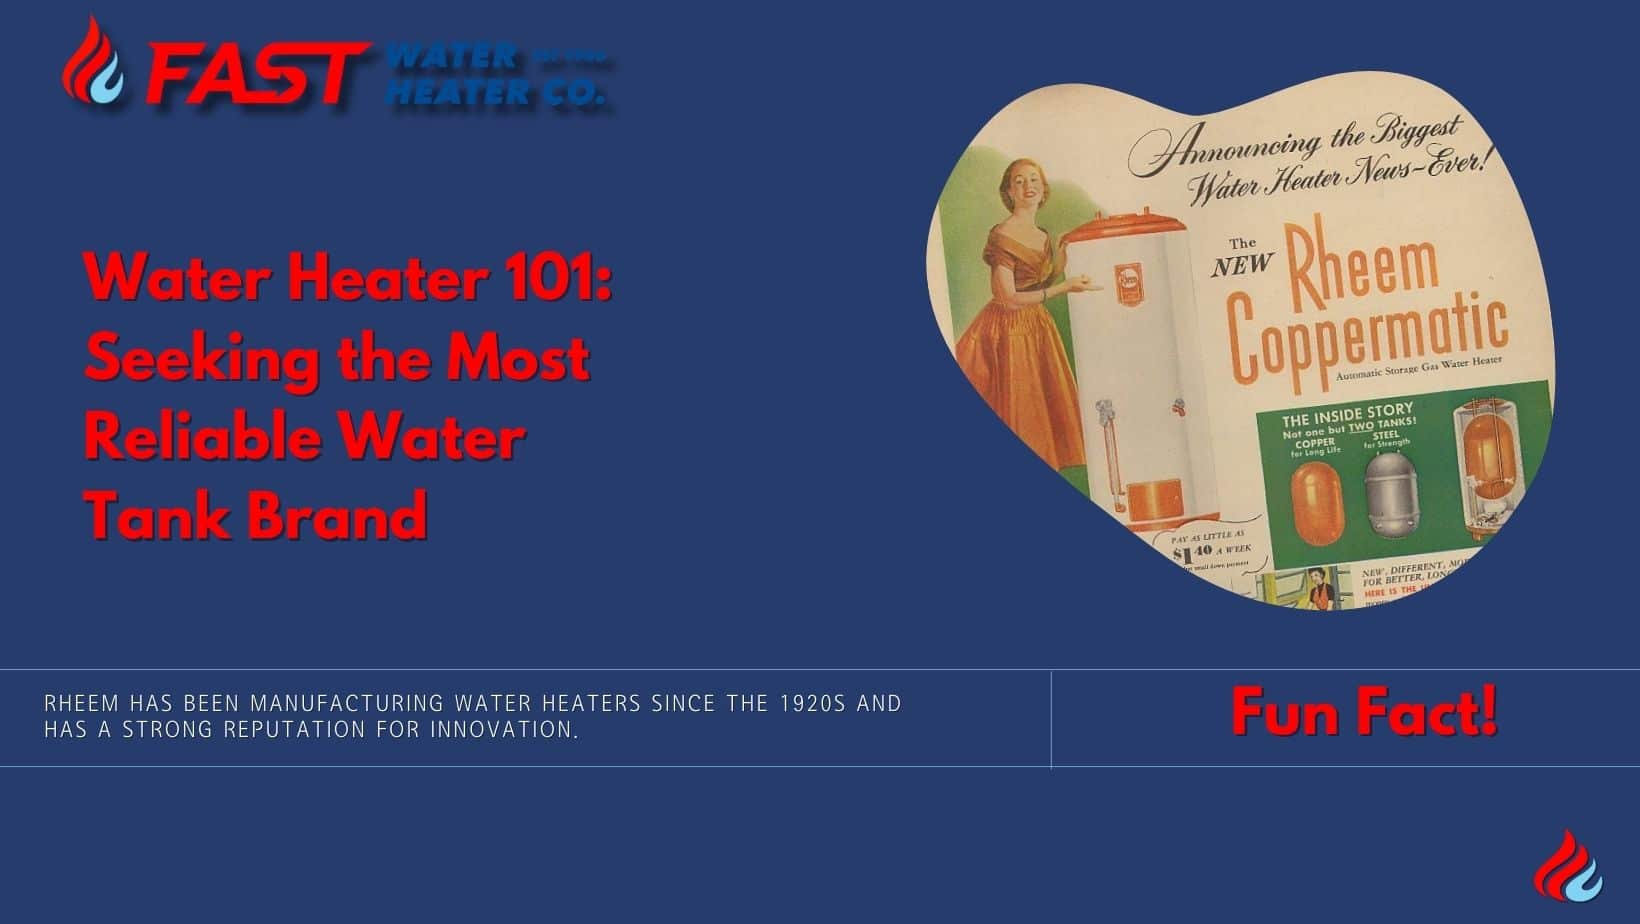 Rheem has been manufacturing water heaters since the 1920s and has a strong reputation for innovation.